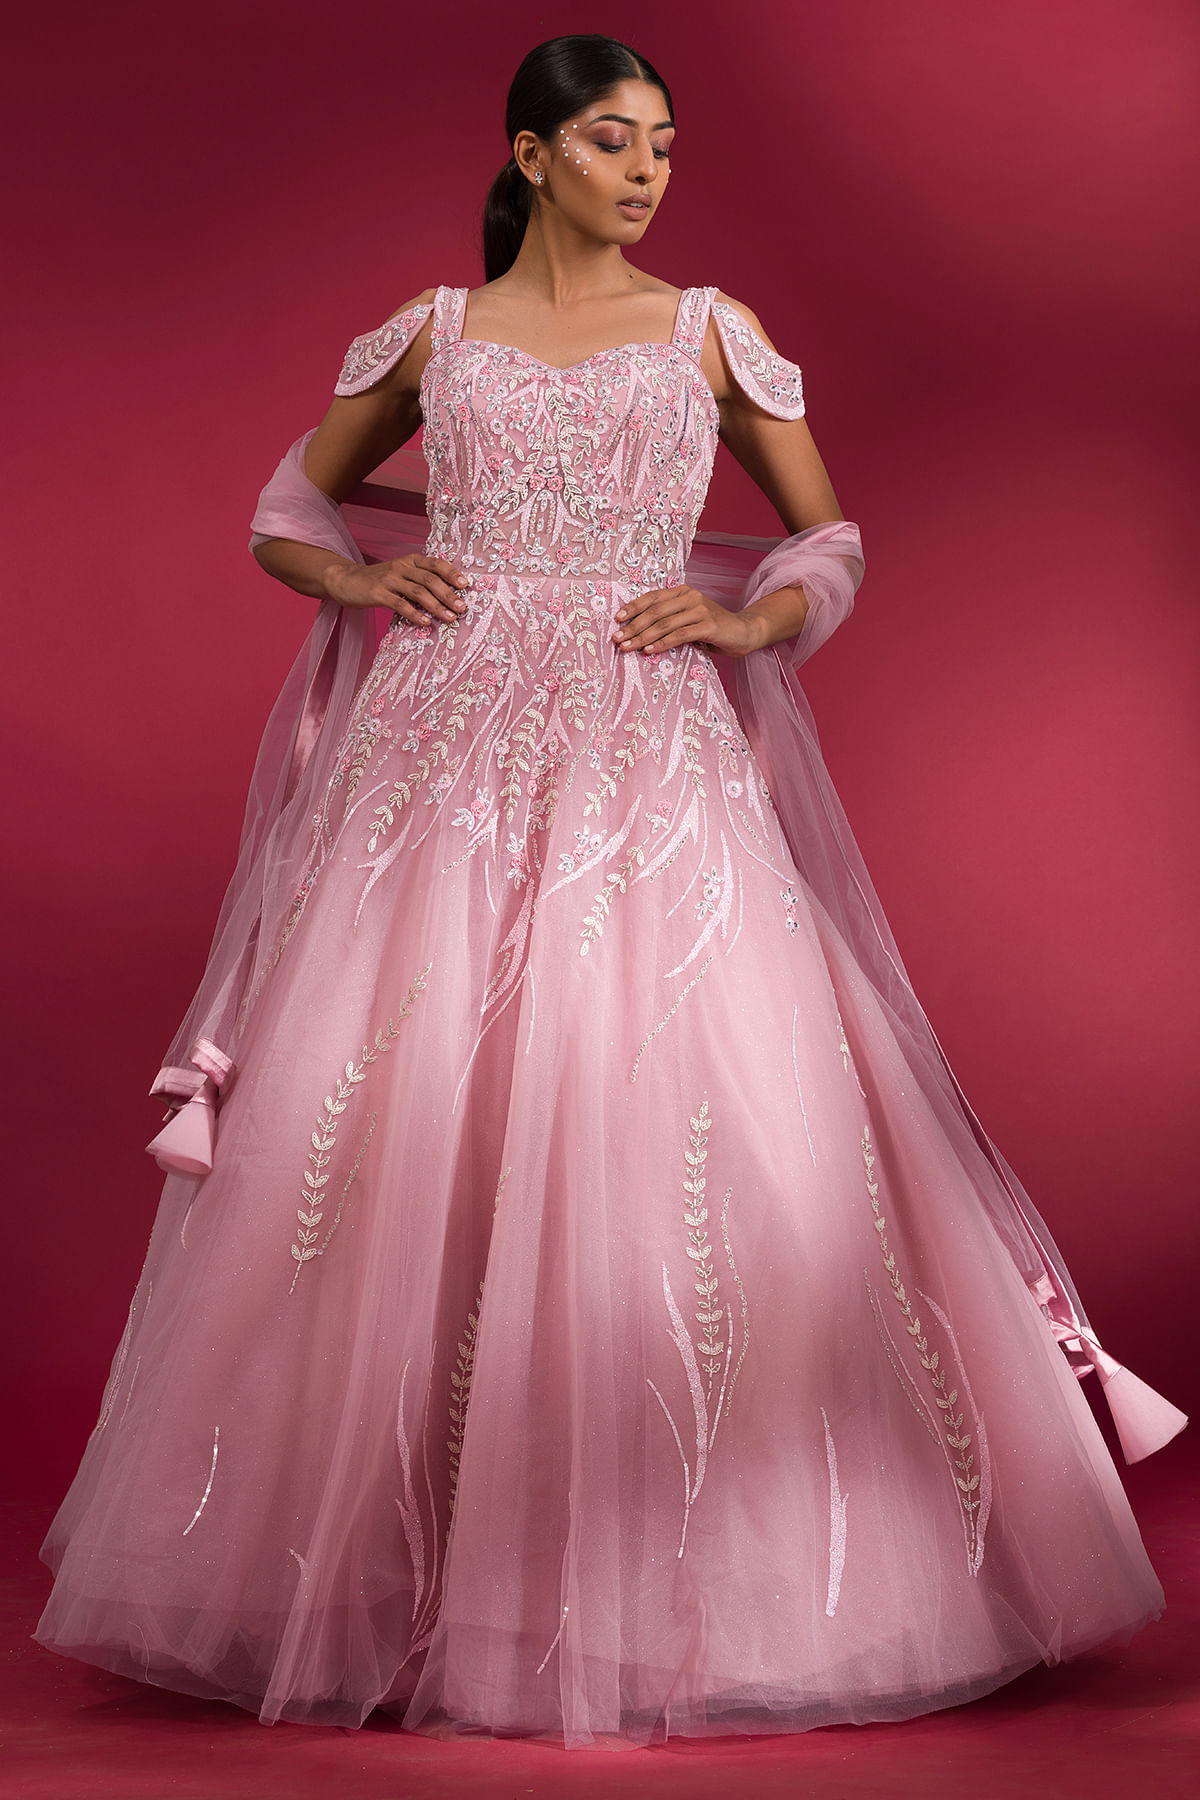 Cotton Candy Pink Sequins Embroidered Net Cocktail Gown